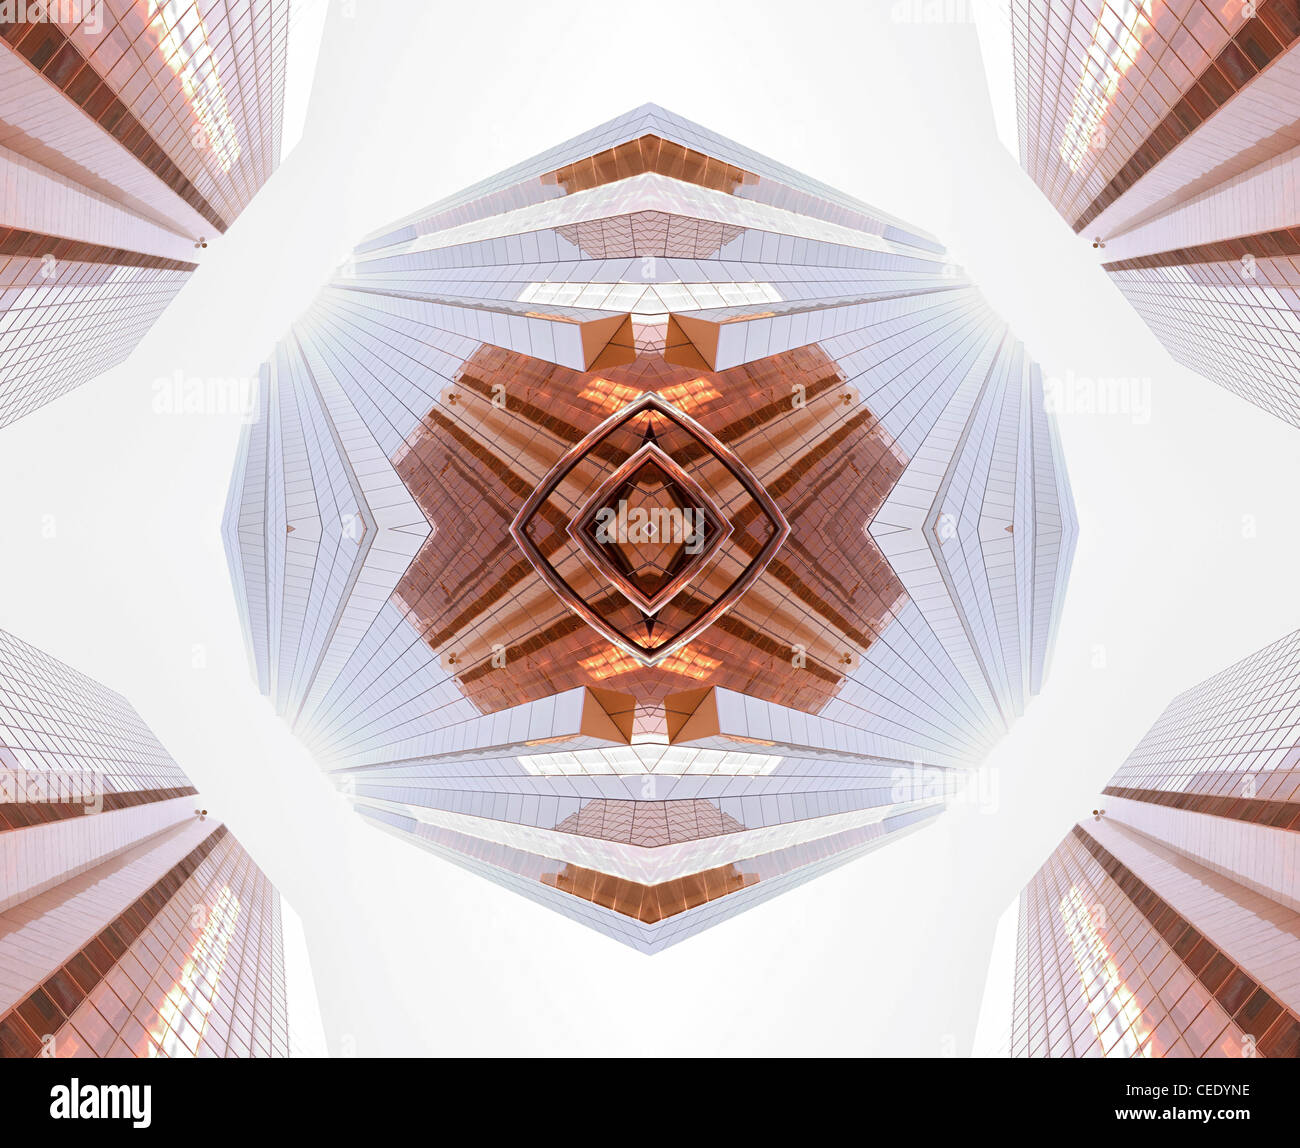 Architecture abstract Stock Photo